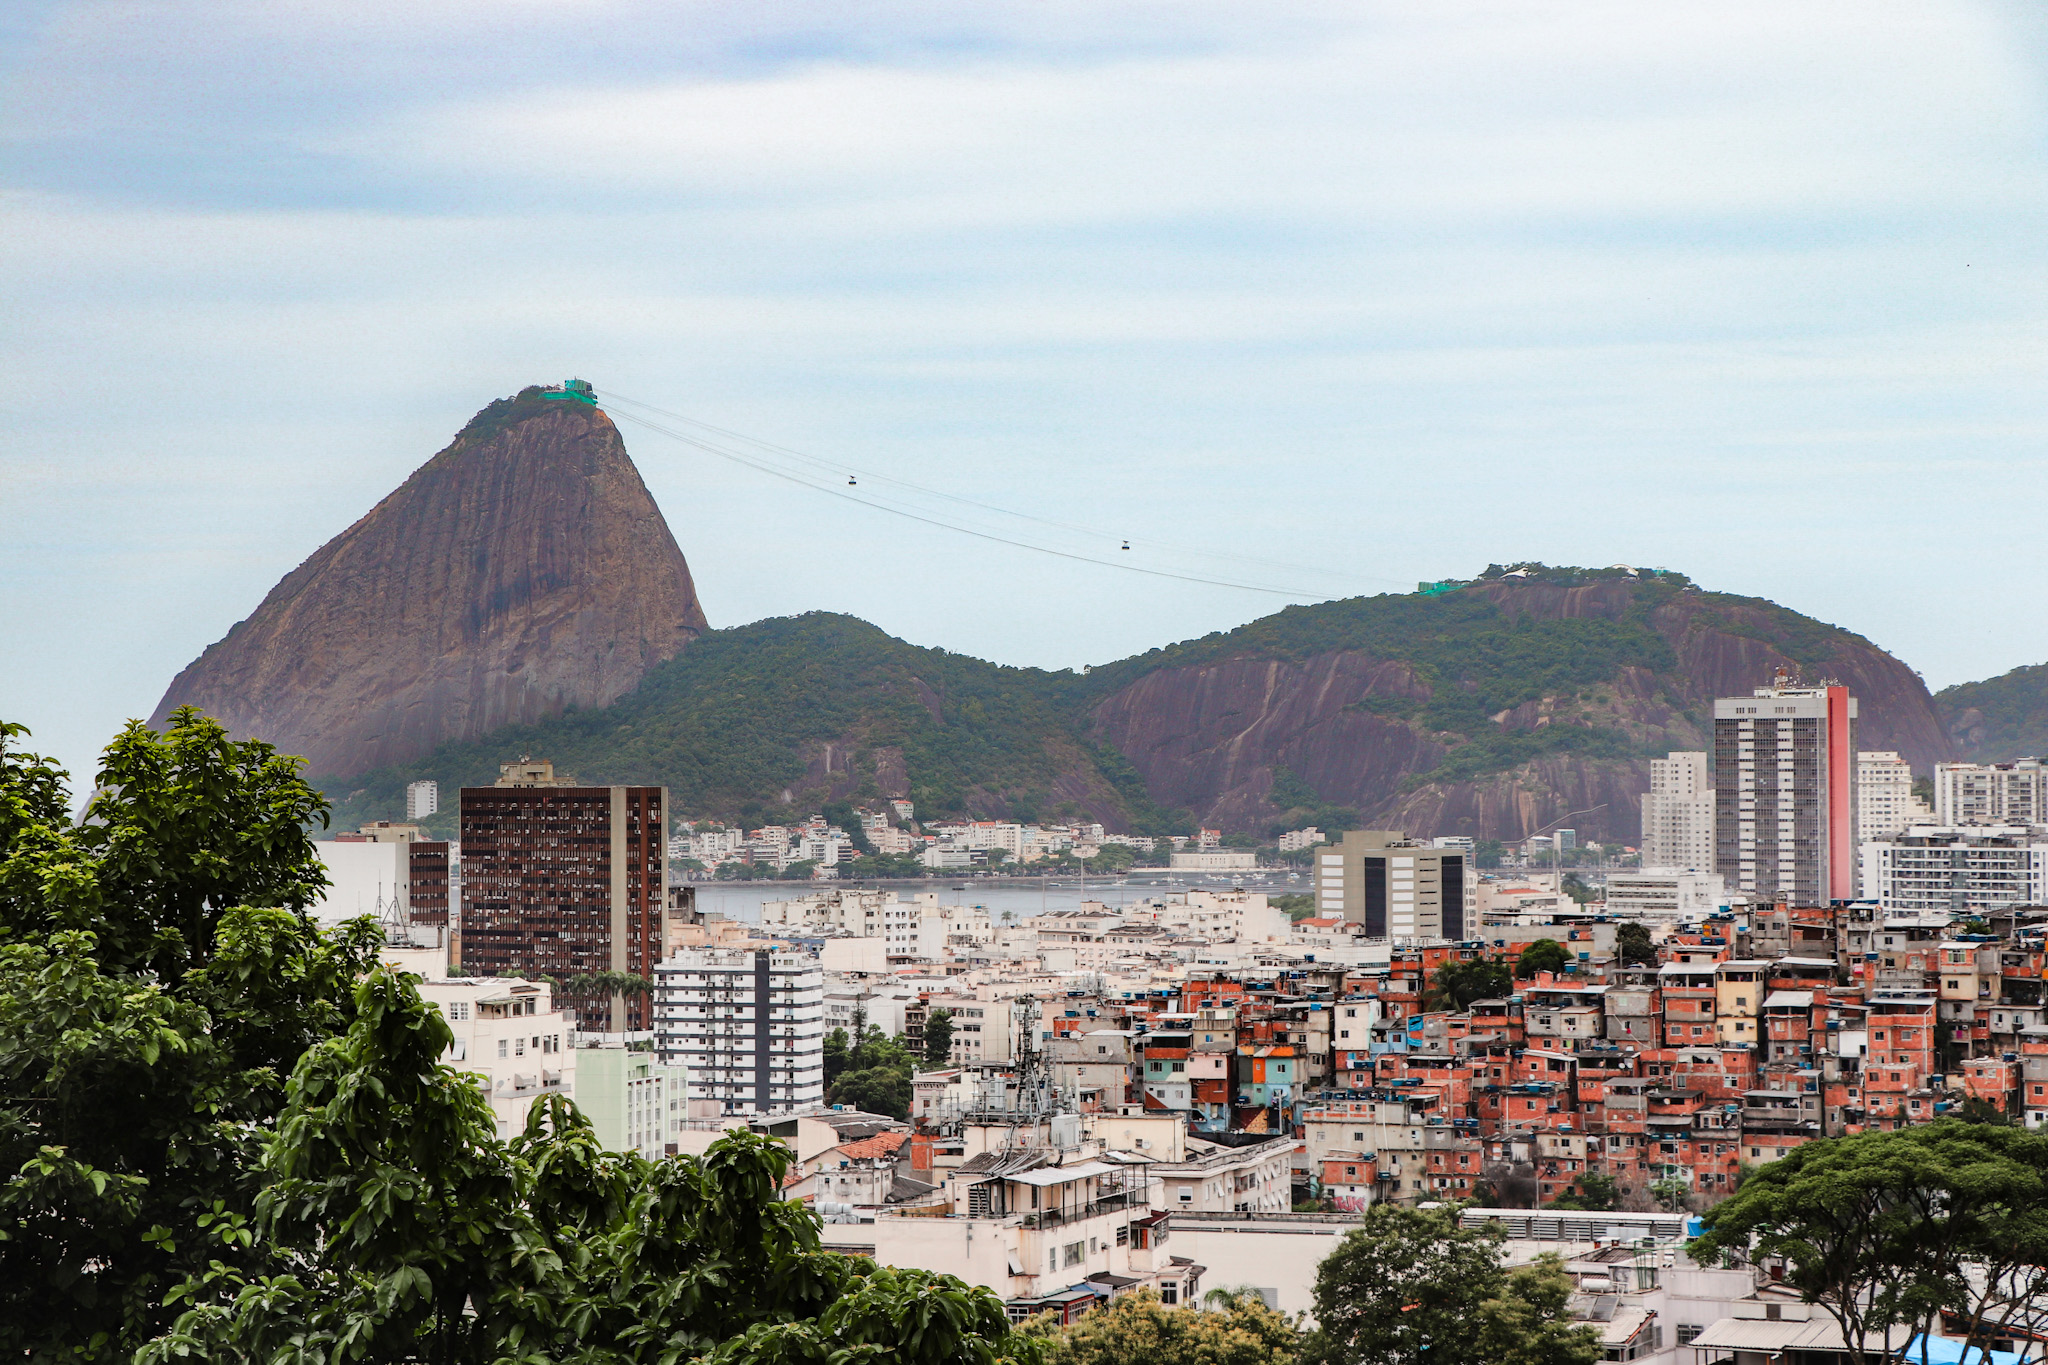 Things to do in Rio: Go top on the Sugarloaf Mountain